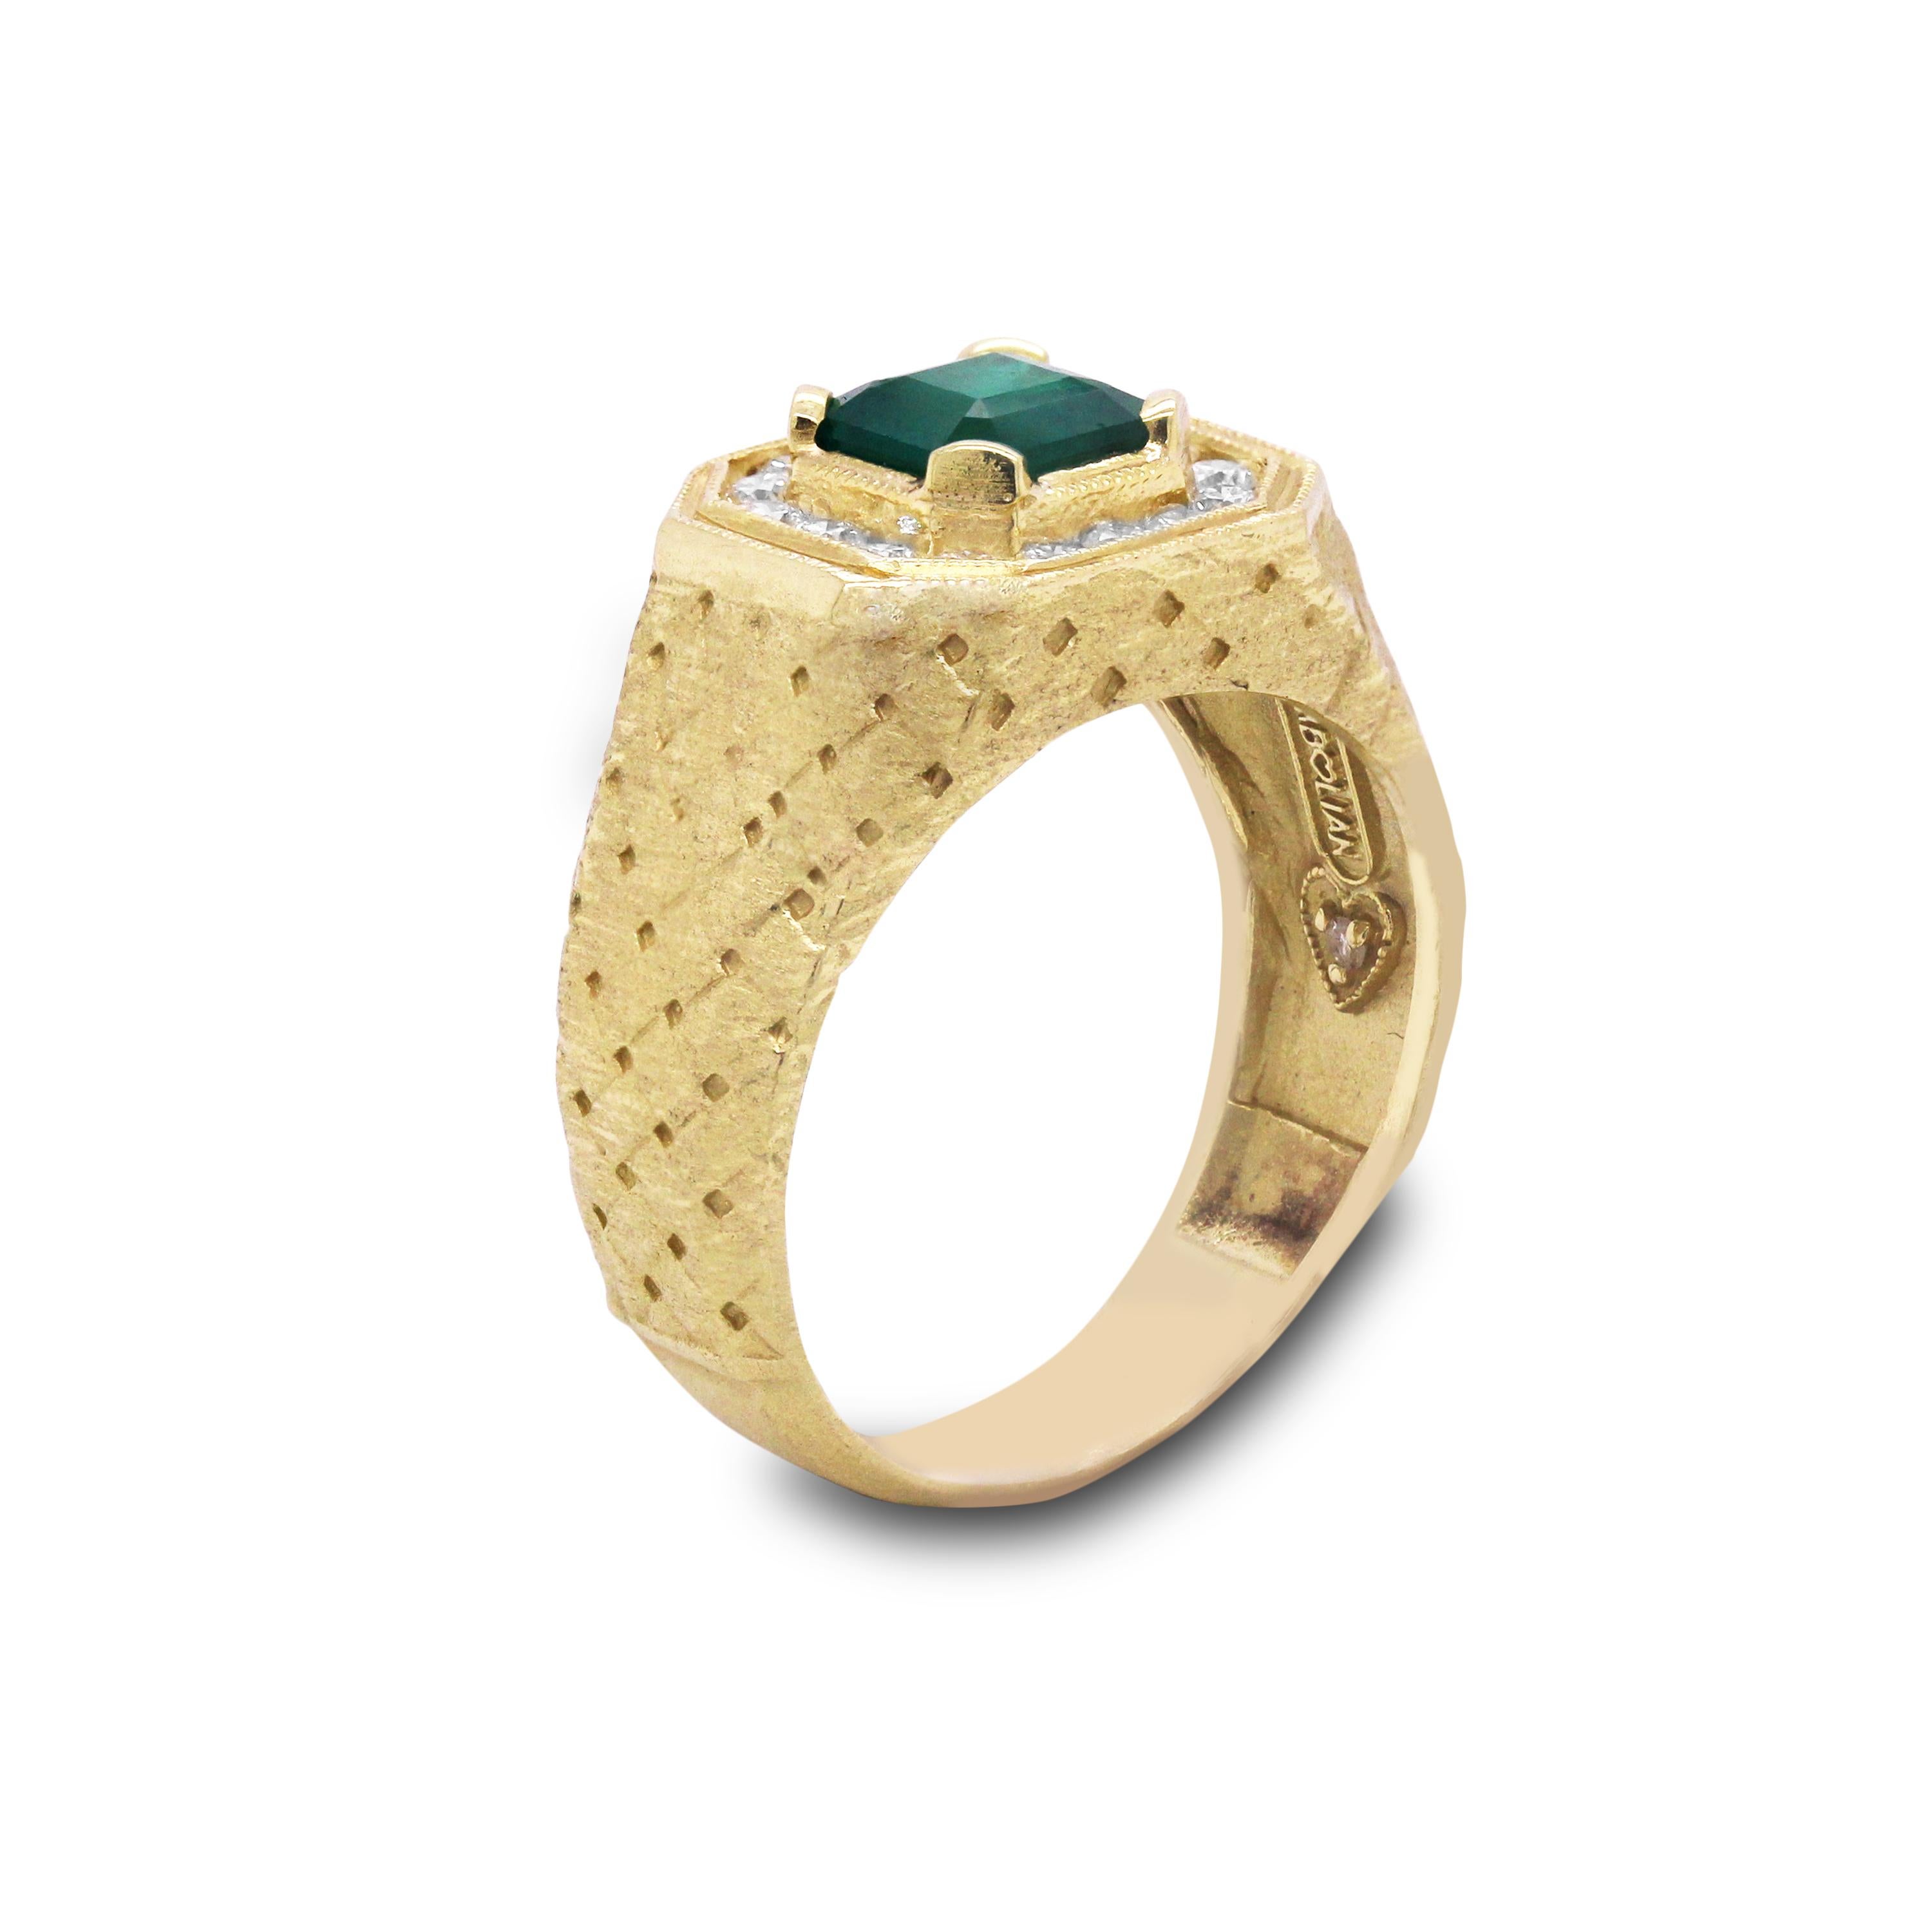 18K Yellow Gold Mens Ring with Diamonds and Emerald center by Stambolian

This mens ring from Stambolian features textured, brushed gold finish on both sides and the center is Emerald surrounded by diamonds

0.56 carat G color, VS clarity